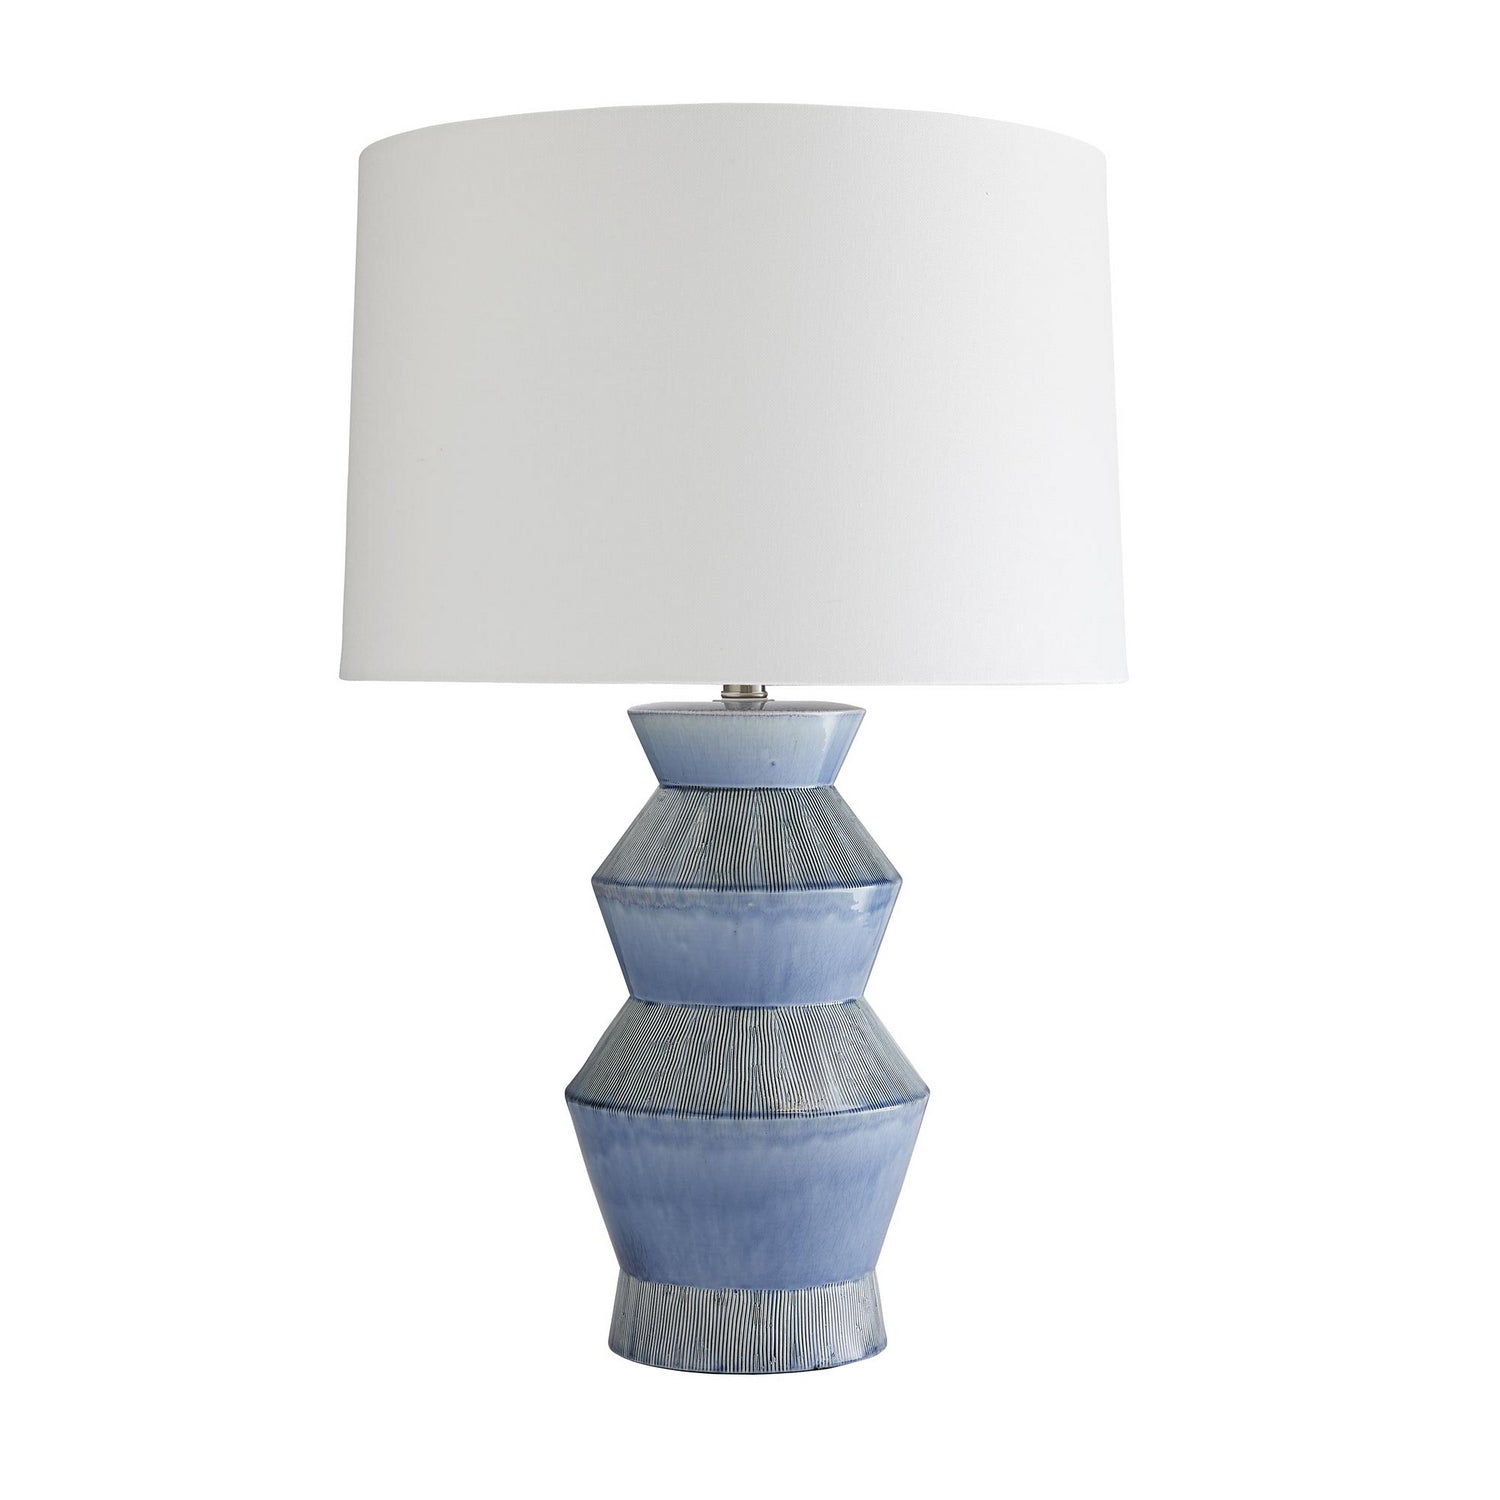 One Light Table Lamp from the Ogden collection in Provincial Blue finish